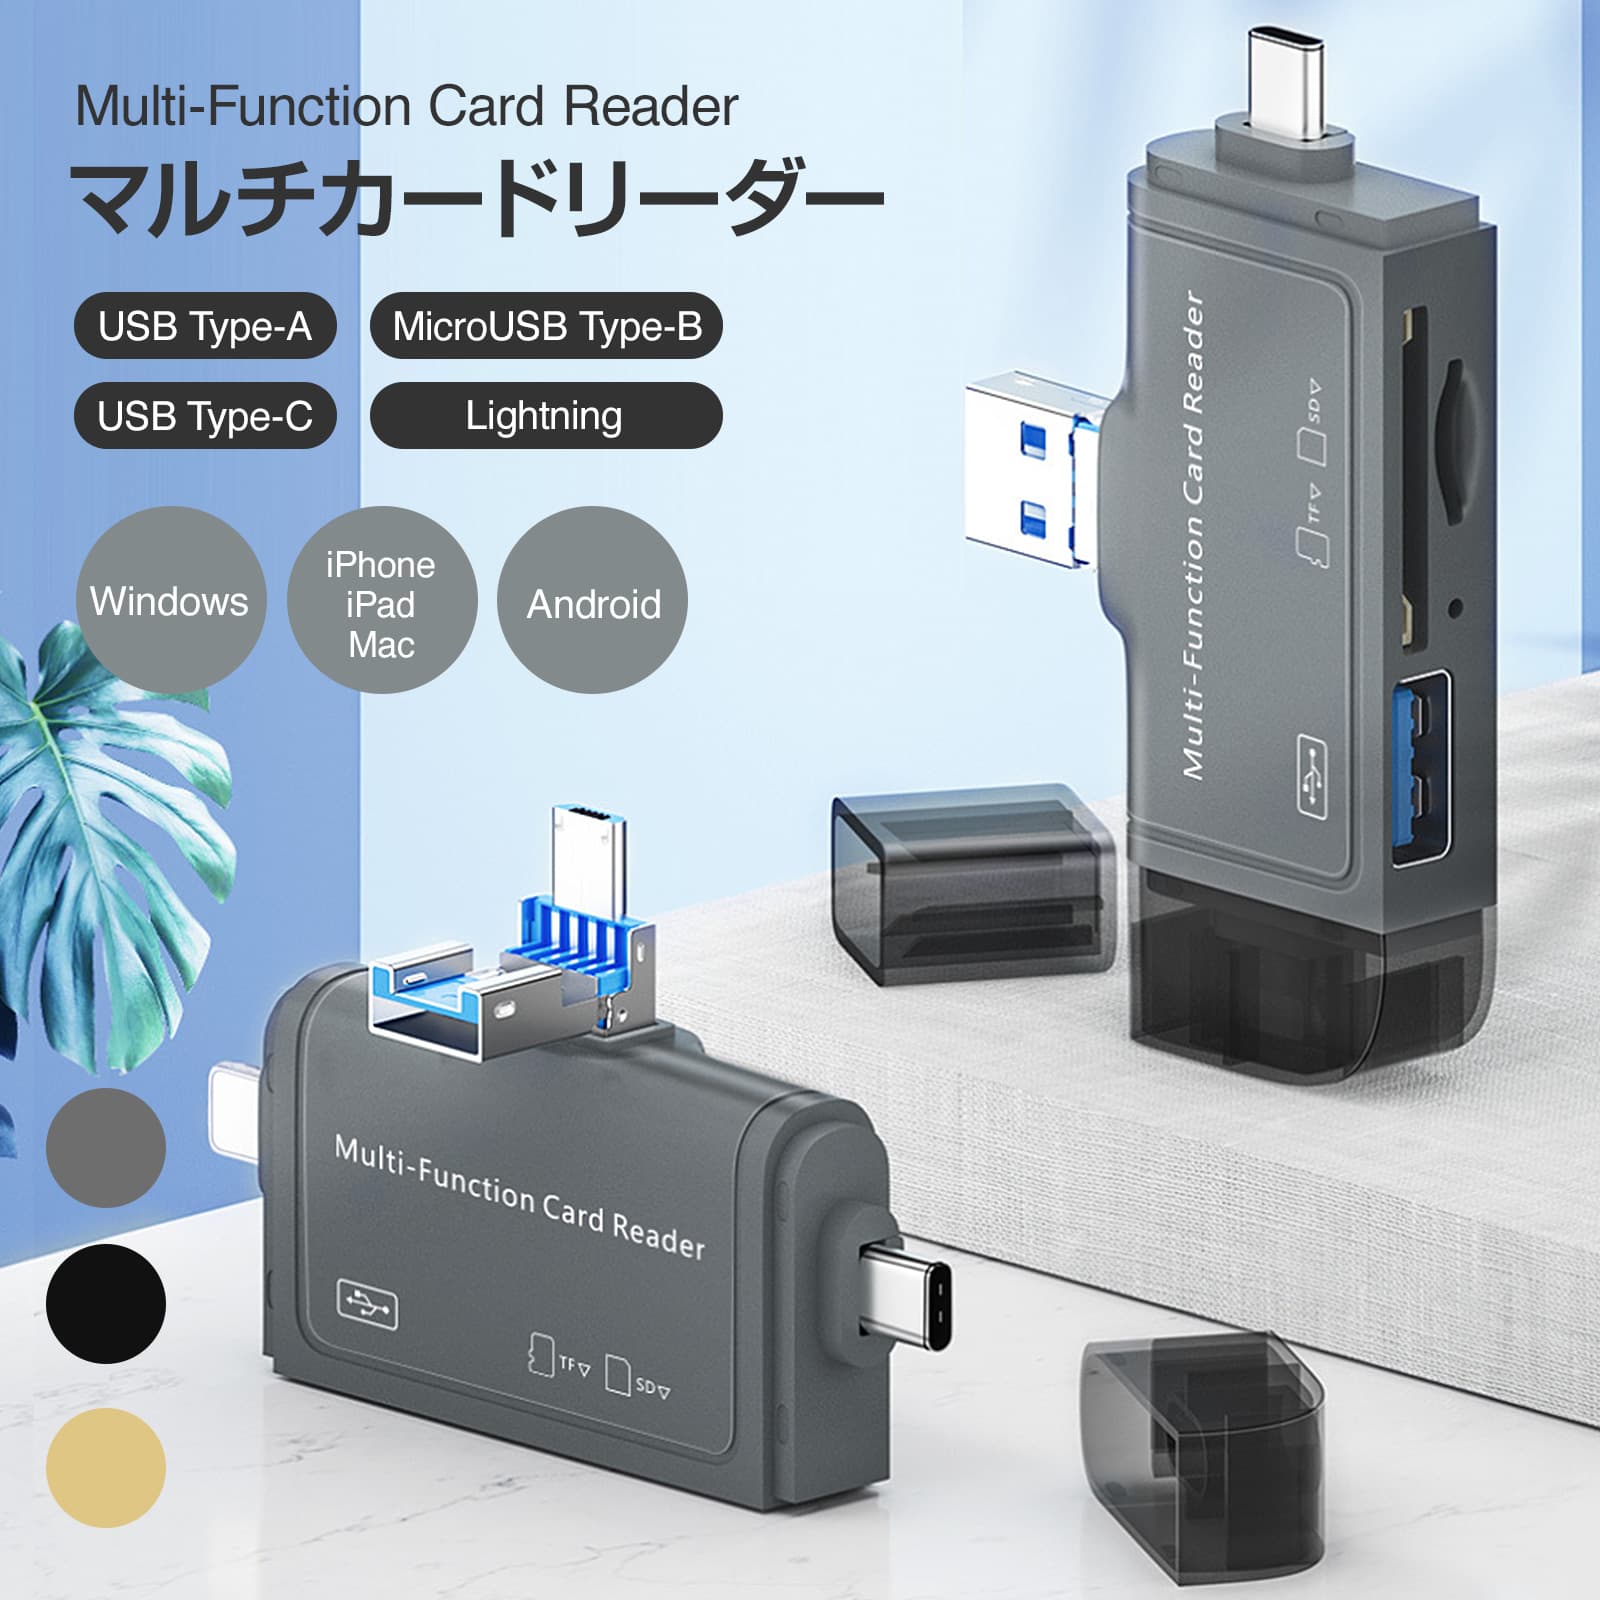 SD card reader smartphone capacity shortage measures photograph personal computer transfer multi card reader iphone android usb high speed backup photograph animation movement memory card transfer 